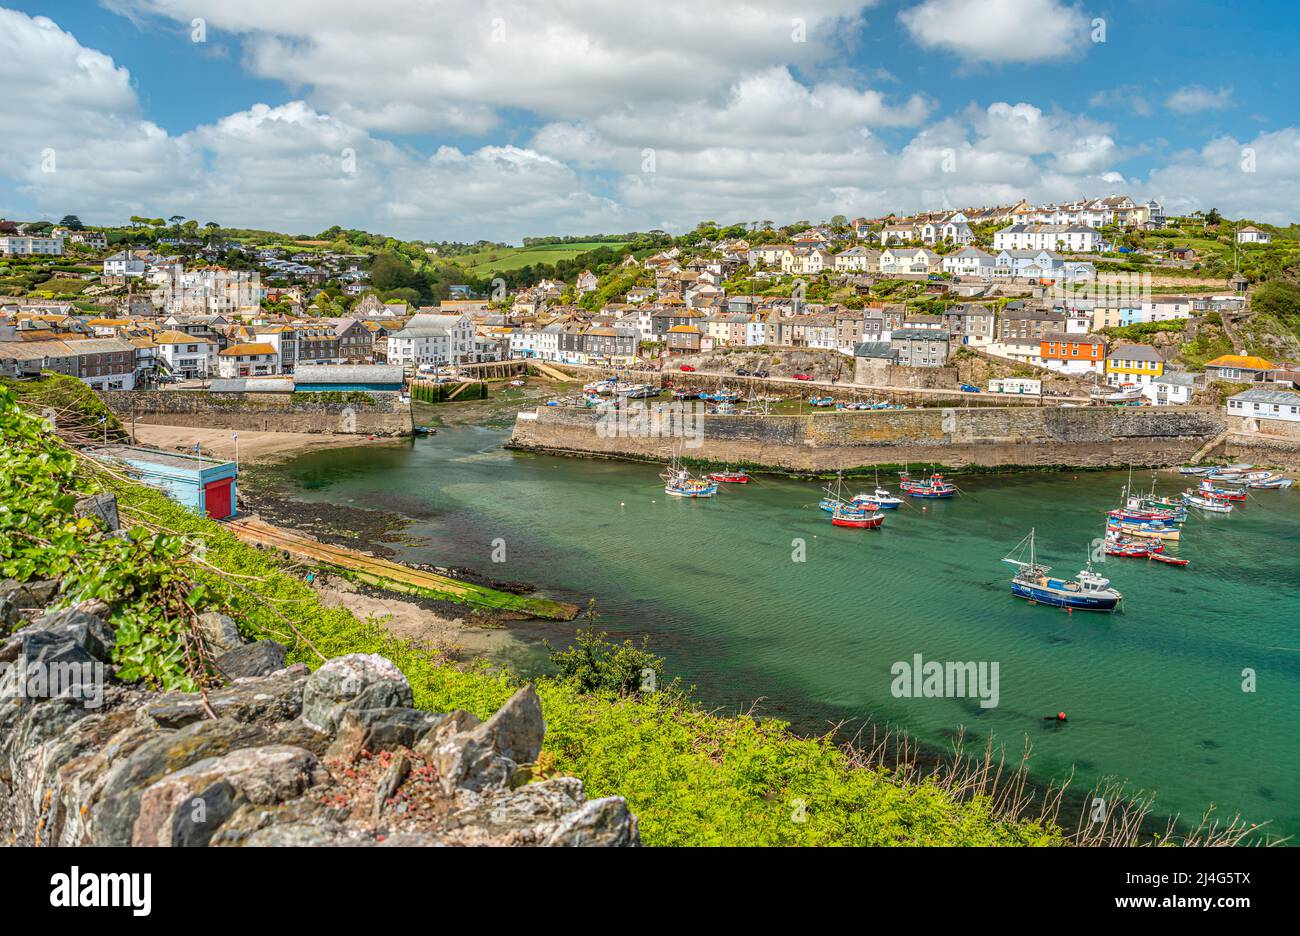 View over the harbor of the fishing village Mevagissey in Cornwall, England, UK | Aussicht ueber den Hafen des Fischerdorfes Mevagissey in Cornwall, E Stock Photo